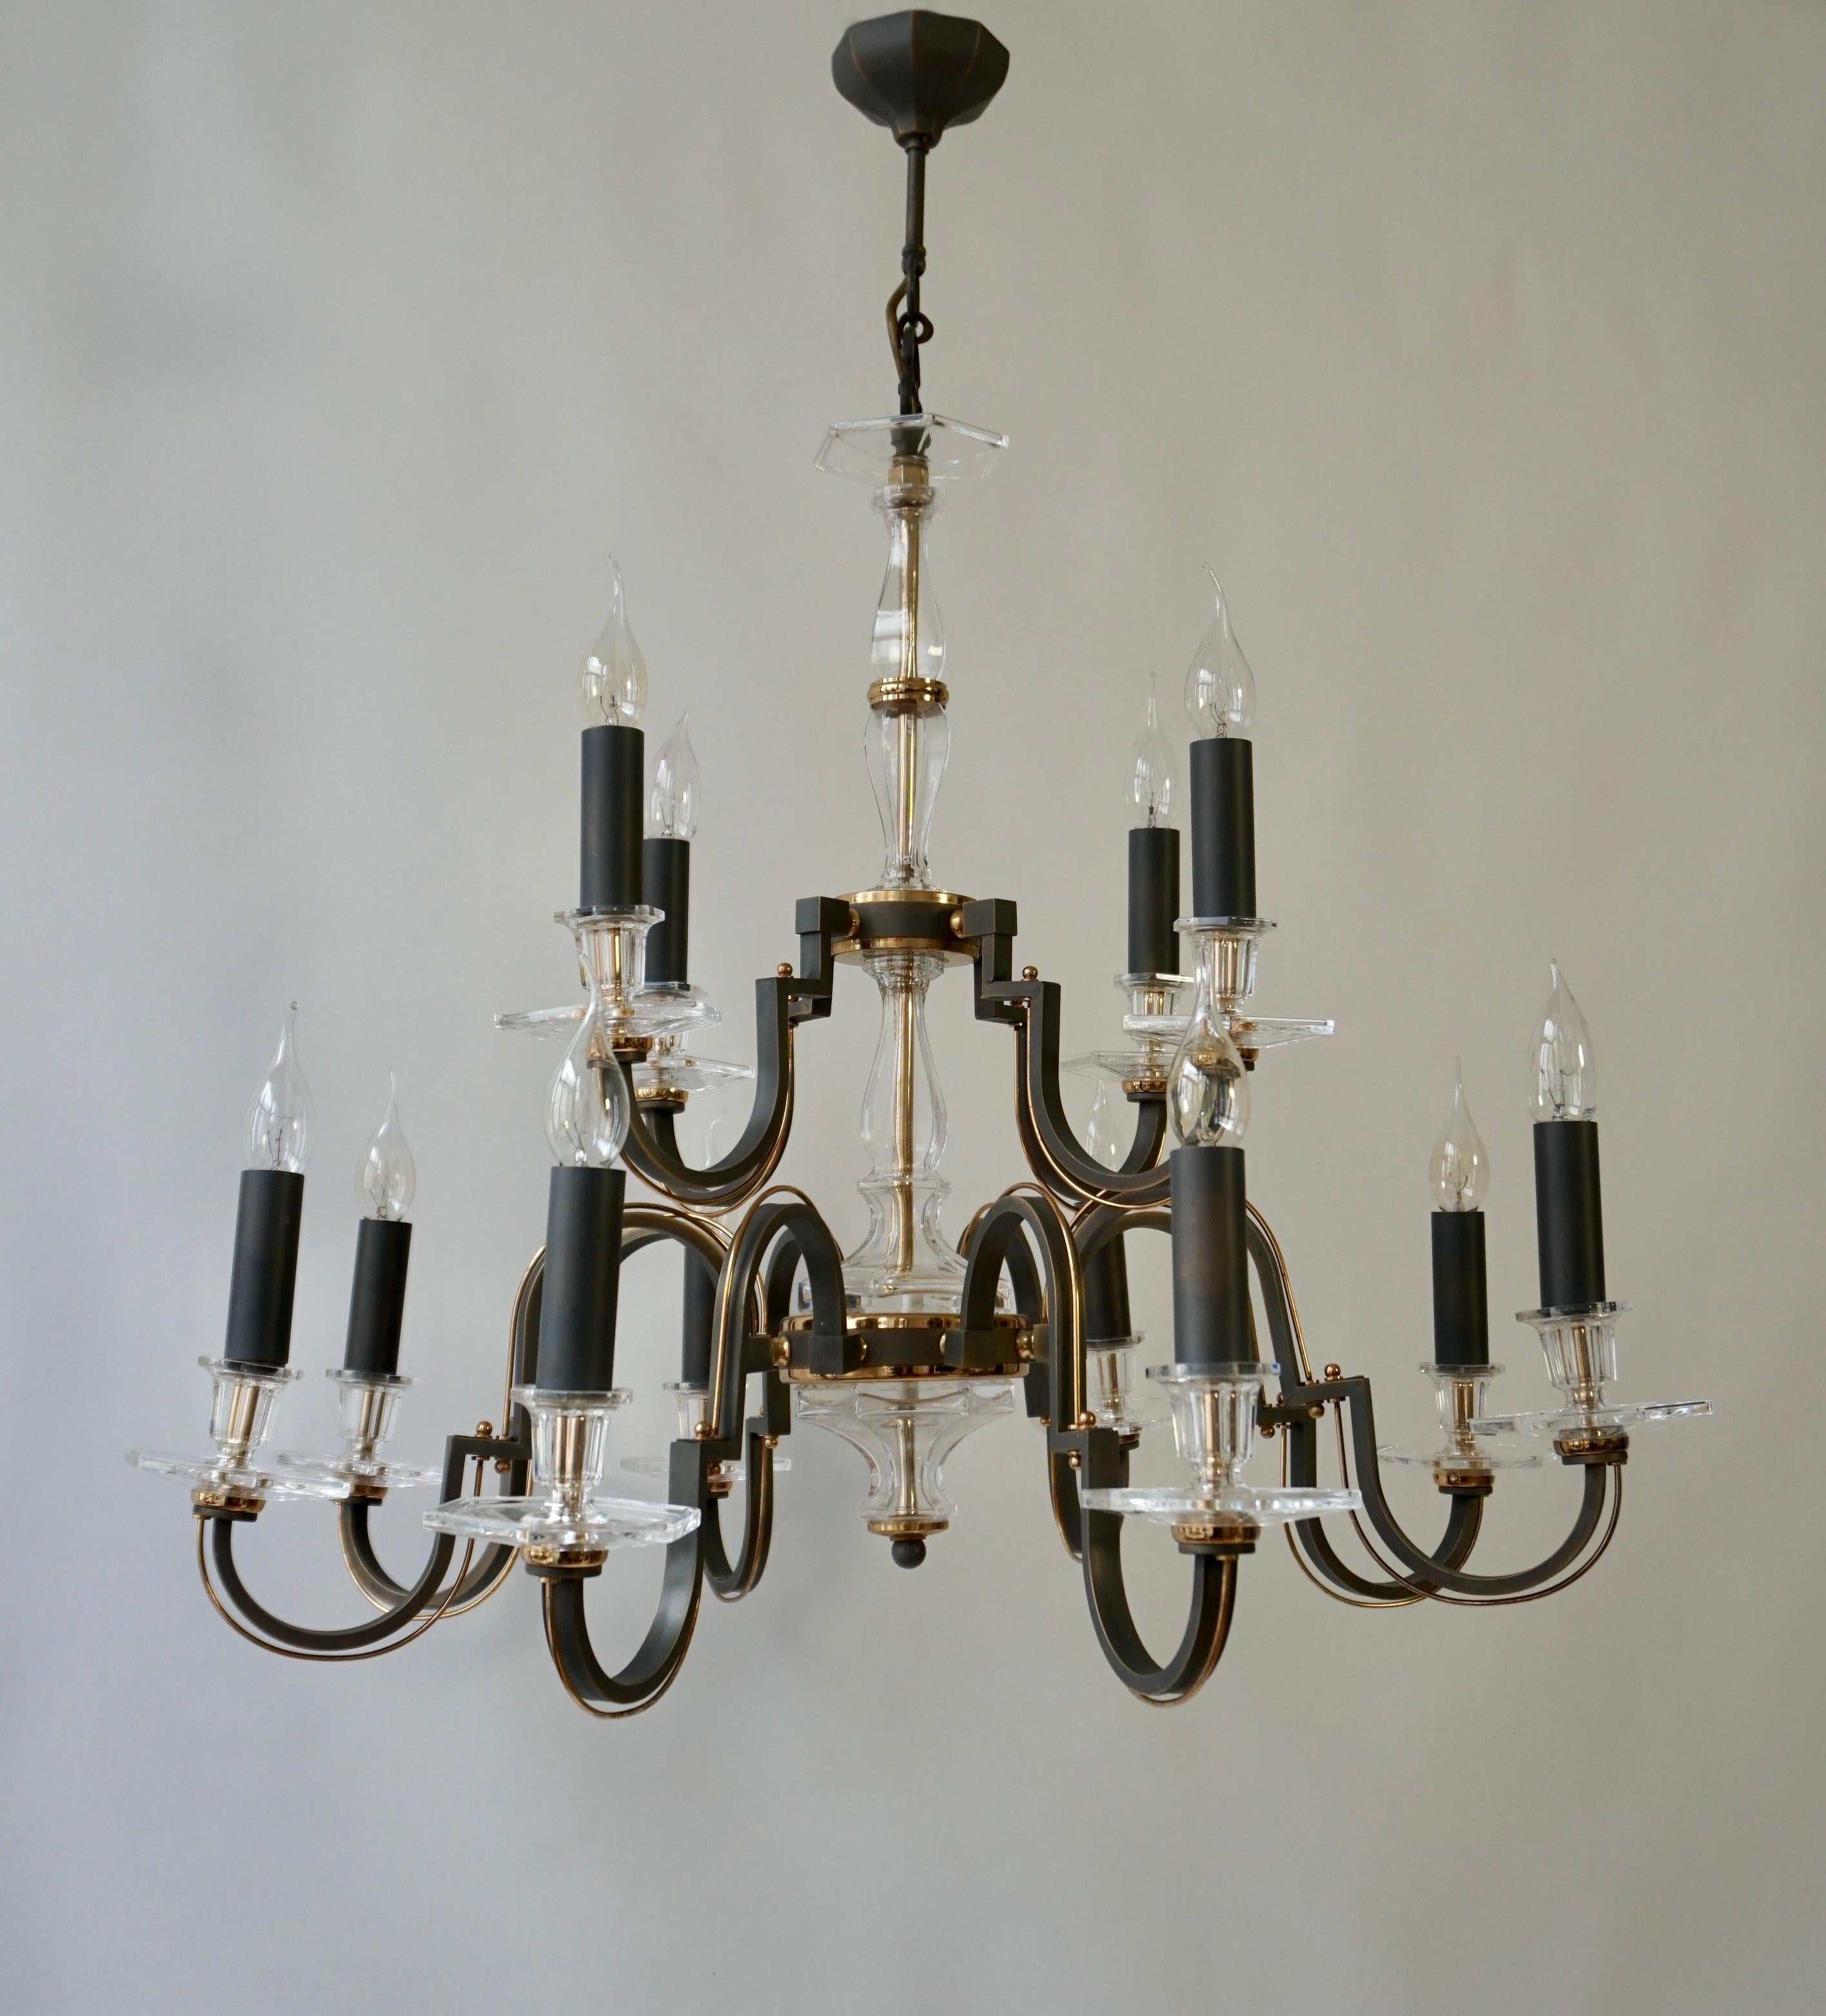 A large Hollywood Regency twelve-armed chandelier from France manufactured in the mid-century (1970s and 1980s). The chandelier has twelve sockets for small incandescent lamps with screw base or E14 type LEDs. It is possible to install this fixture